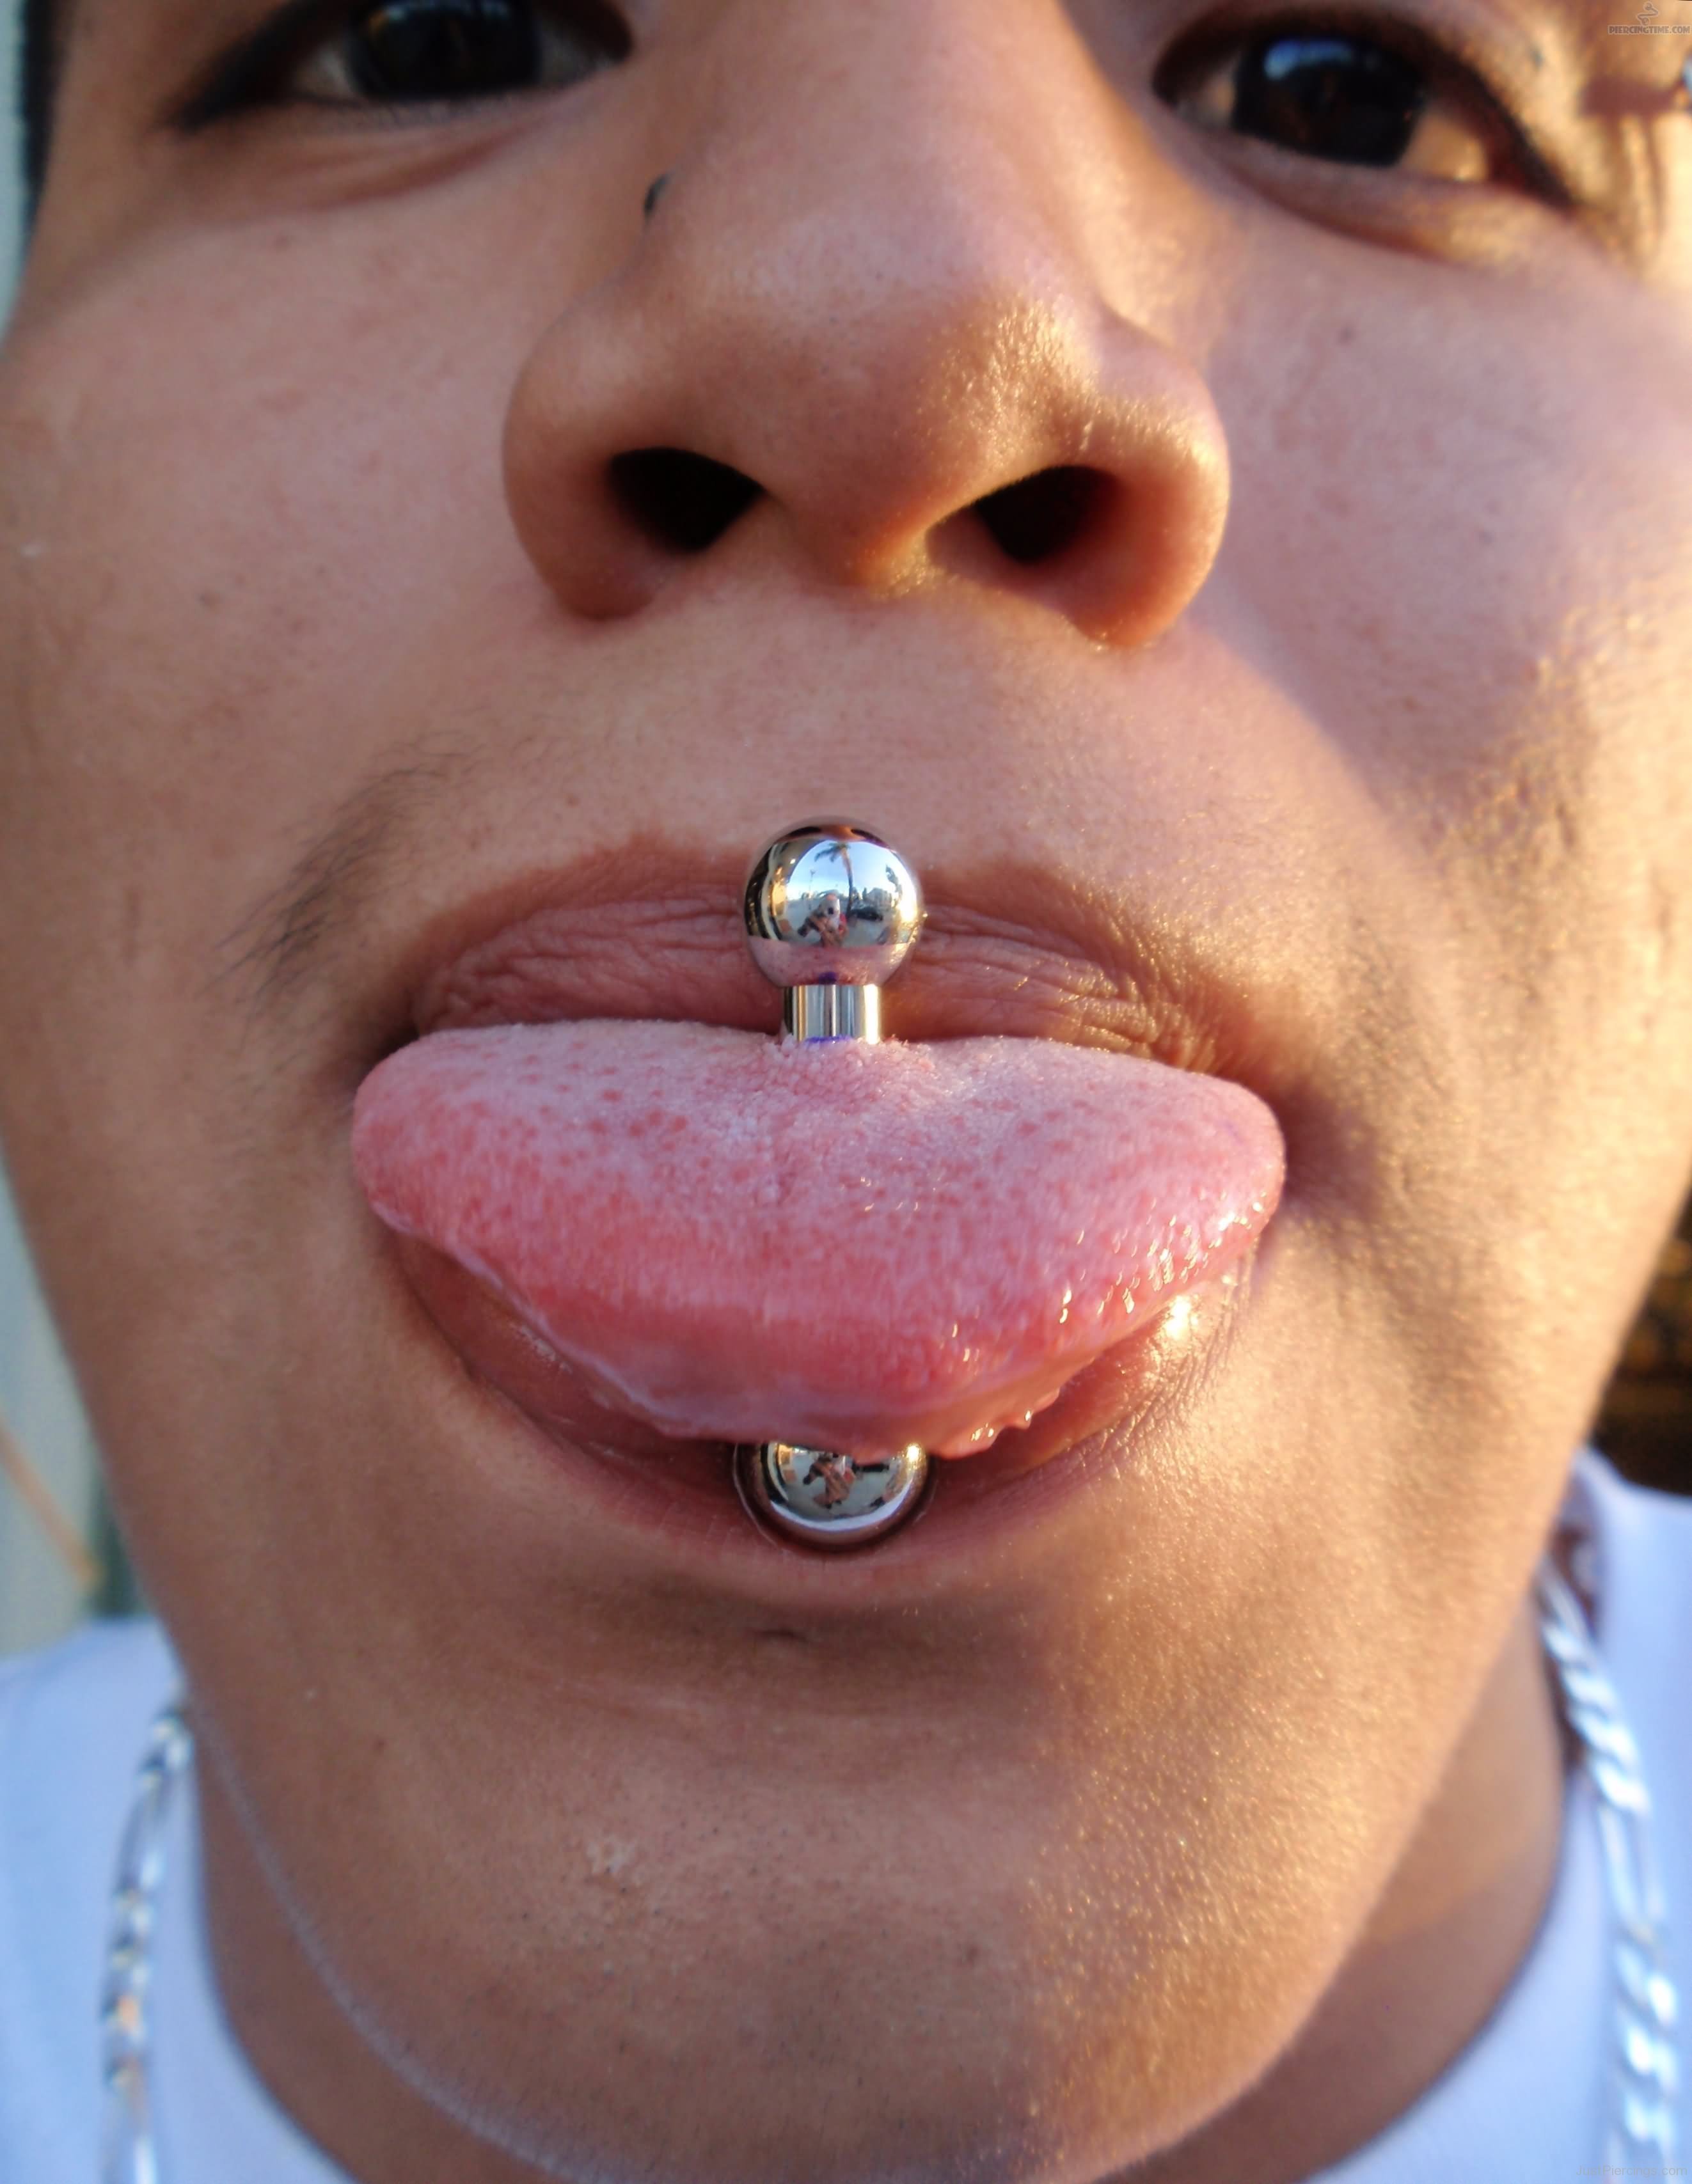 Pictures of tongue rings